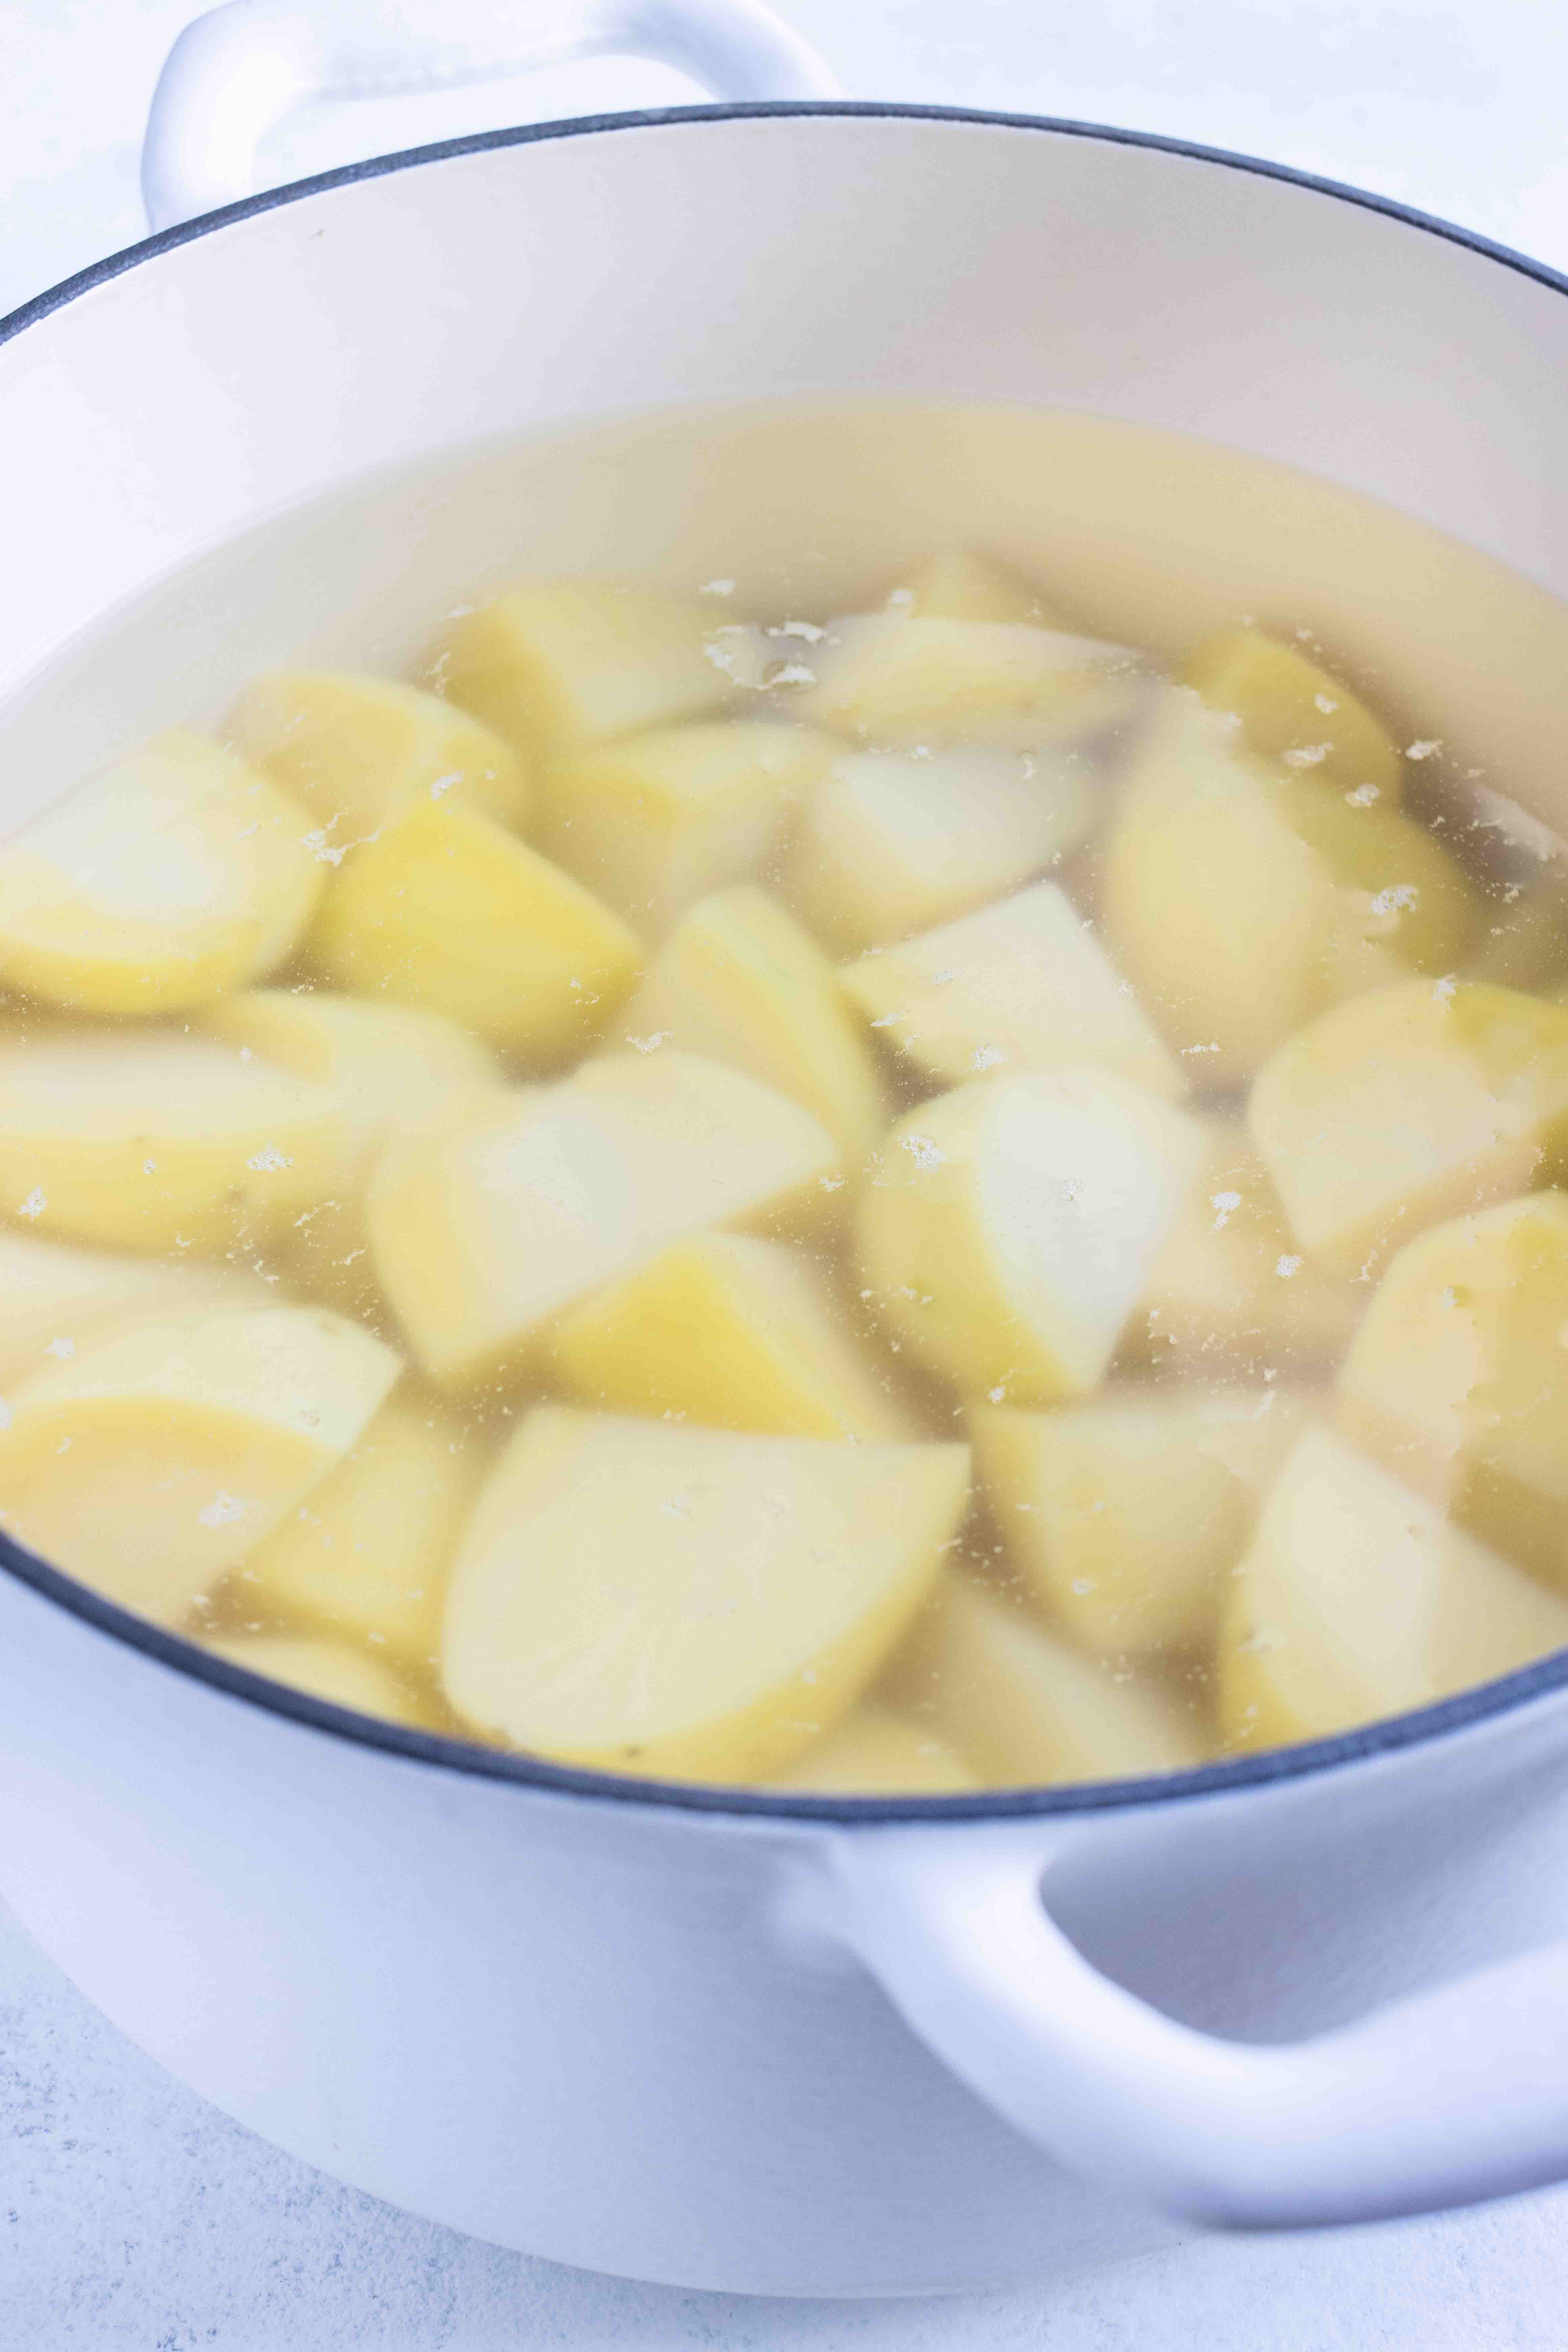 A boiling pot of water is used to cook potatoes.